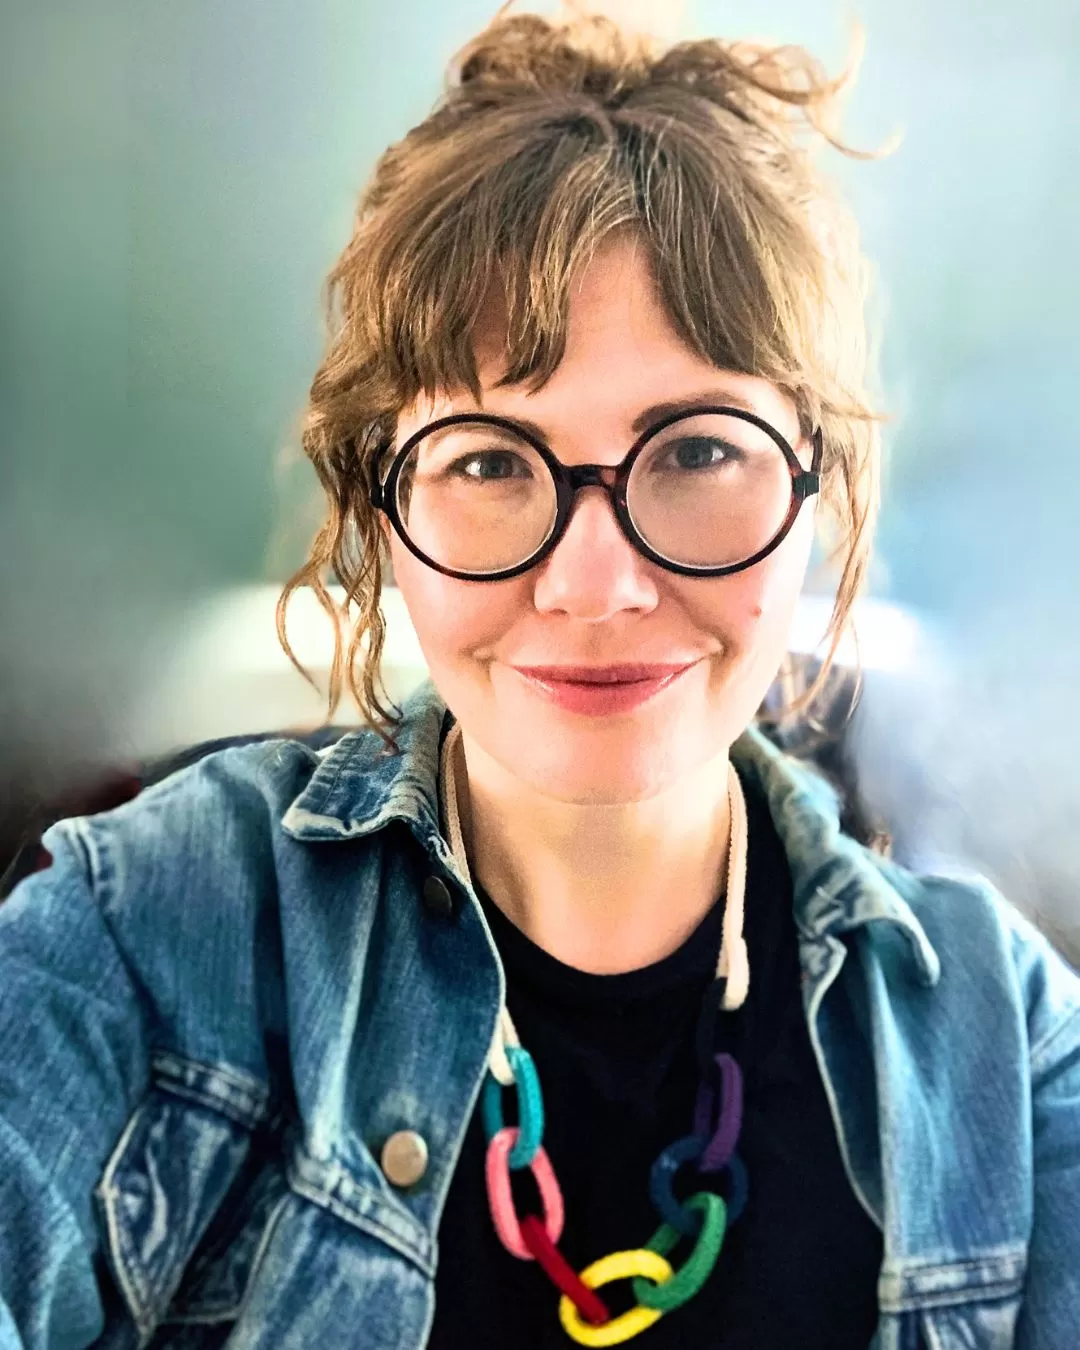 Portrait photo of This Thing is String founder Polly Benson, smiling to camera whilst wearing round glasses, a denim jacket, dark t-shirt and string bling necklace